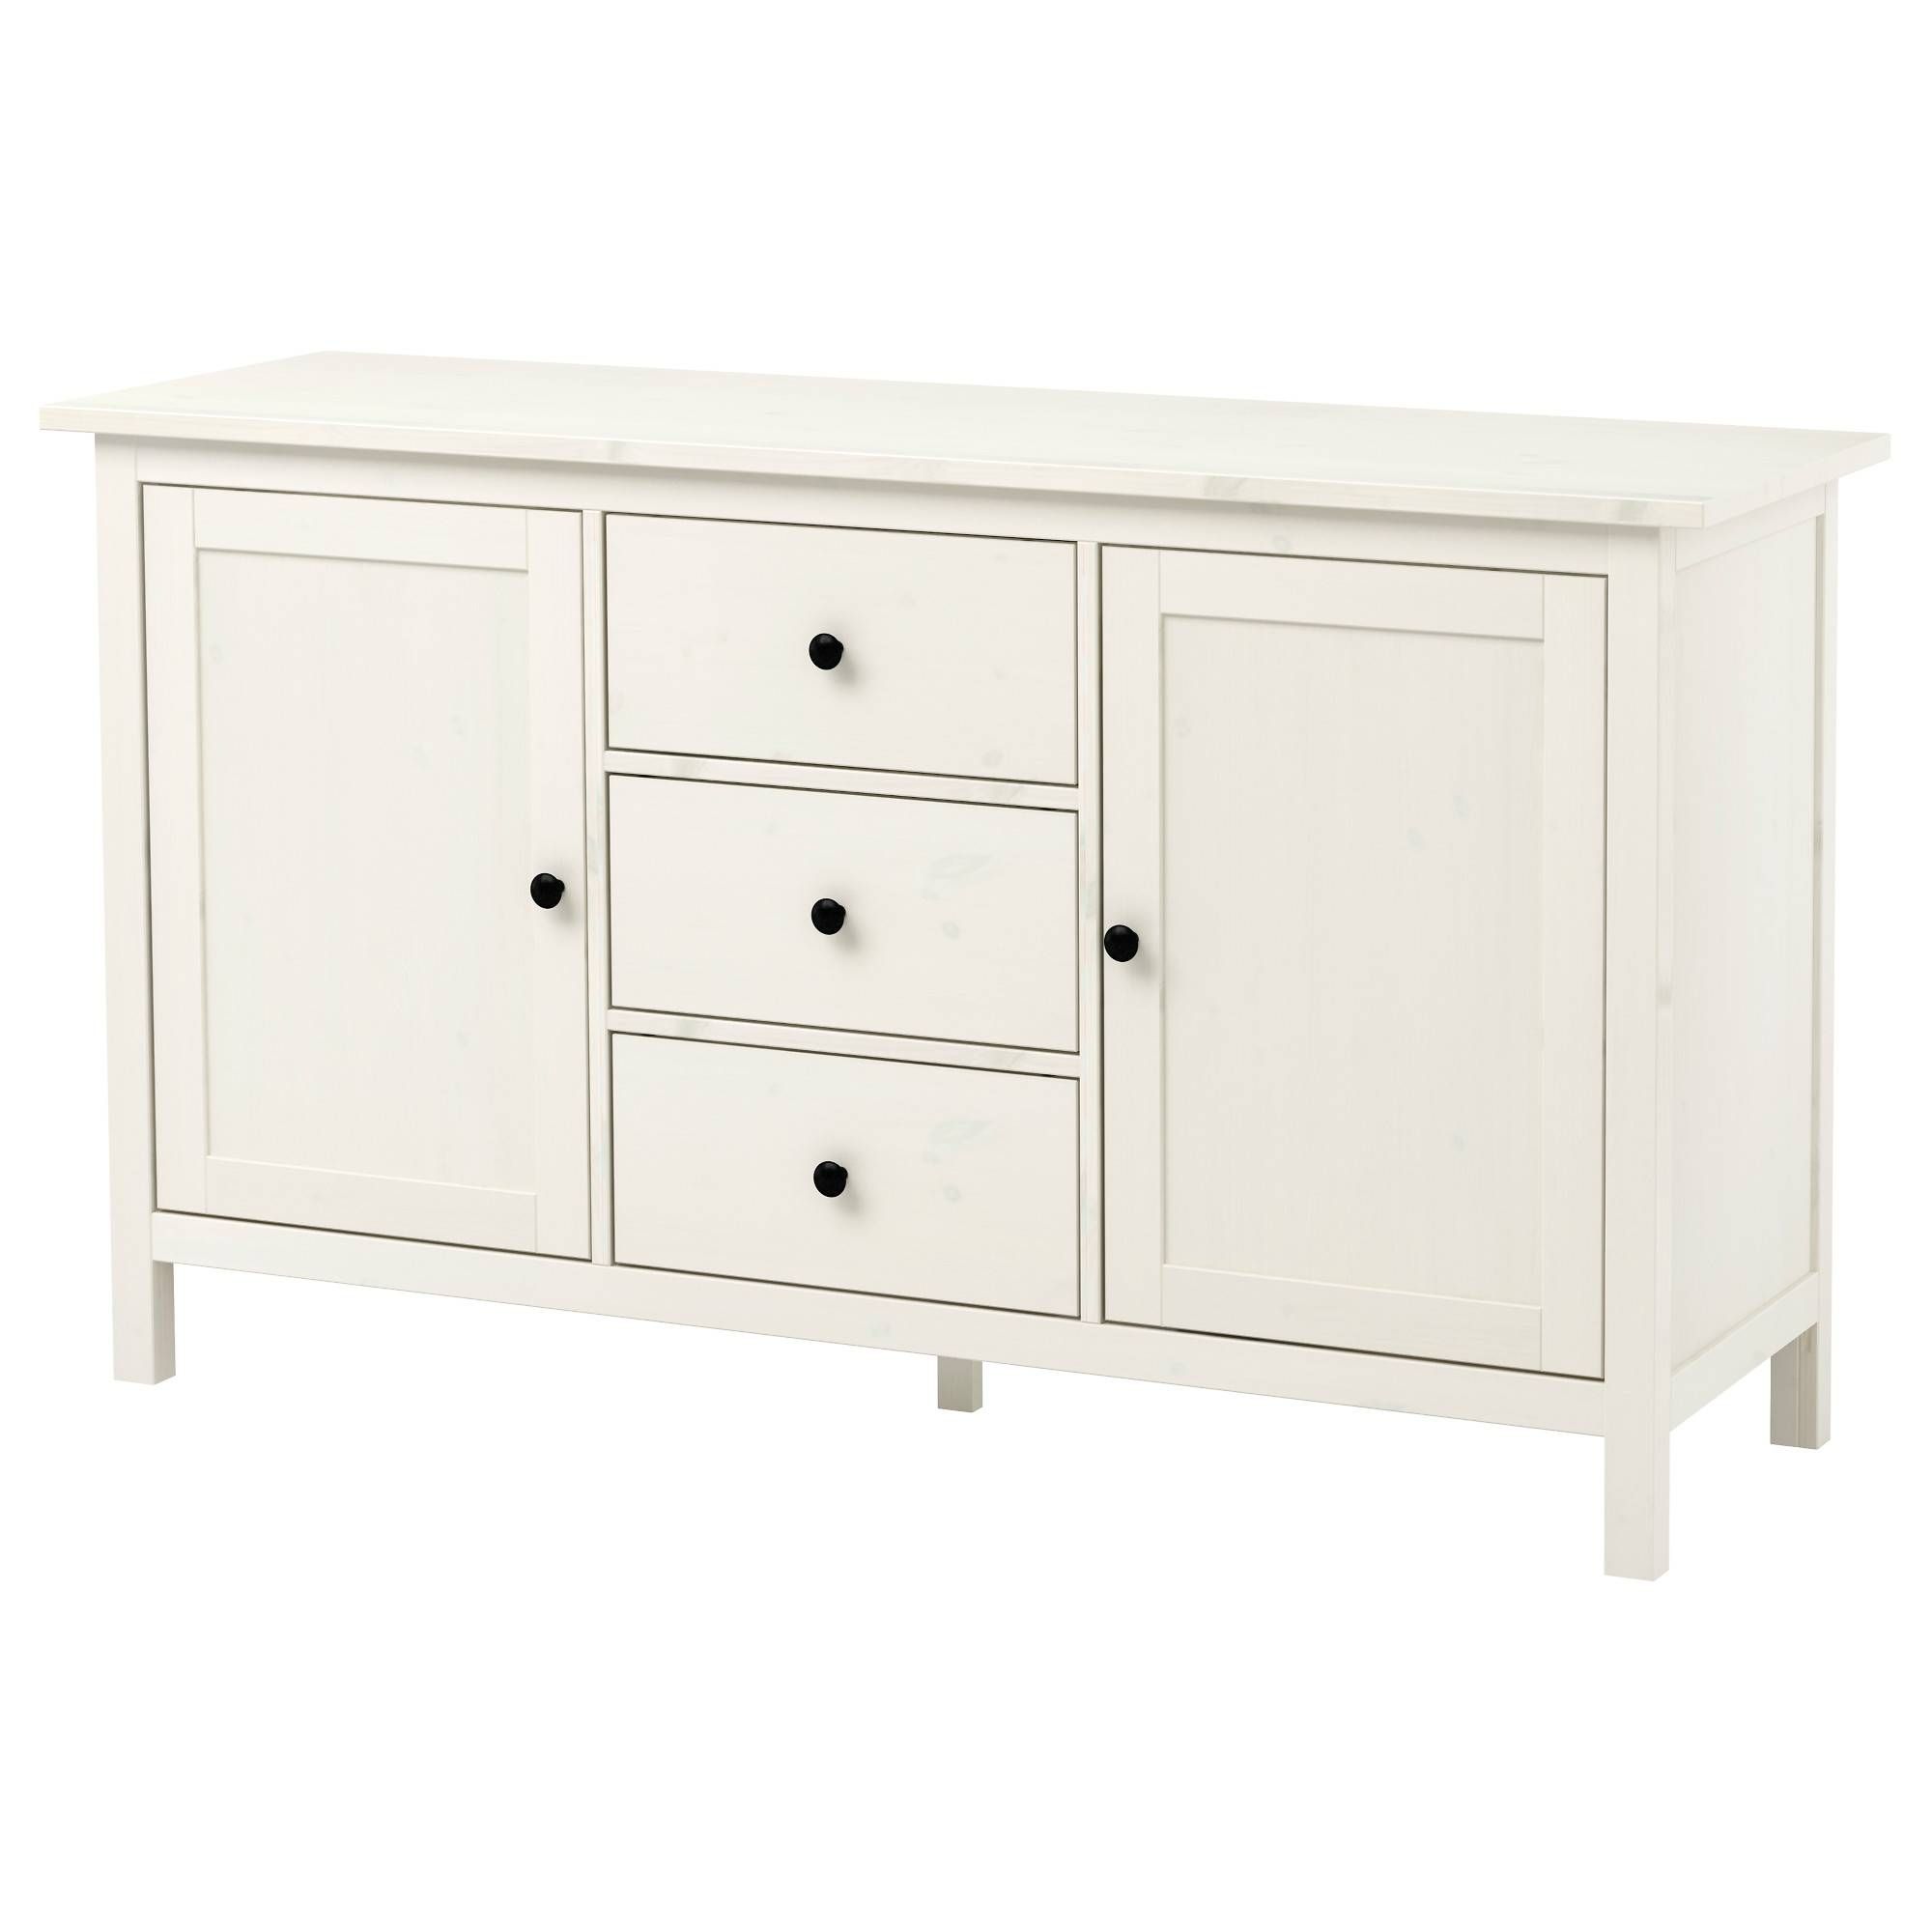 Hemnes Sideboard – White Stain – Ikea Throughout Most Popular Long Thin Sideboards (View 13 of 15)